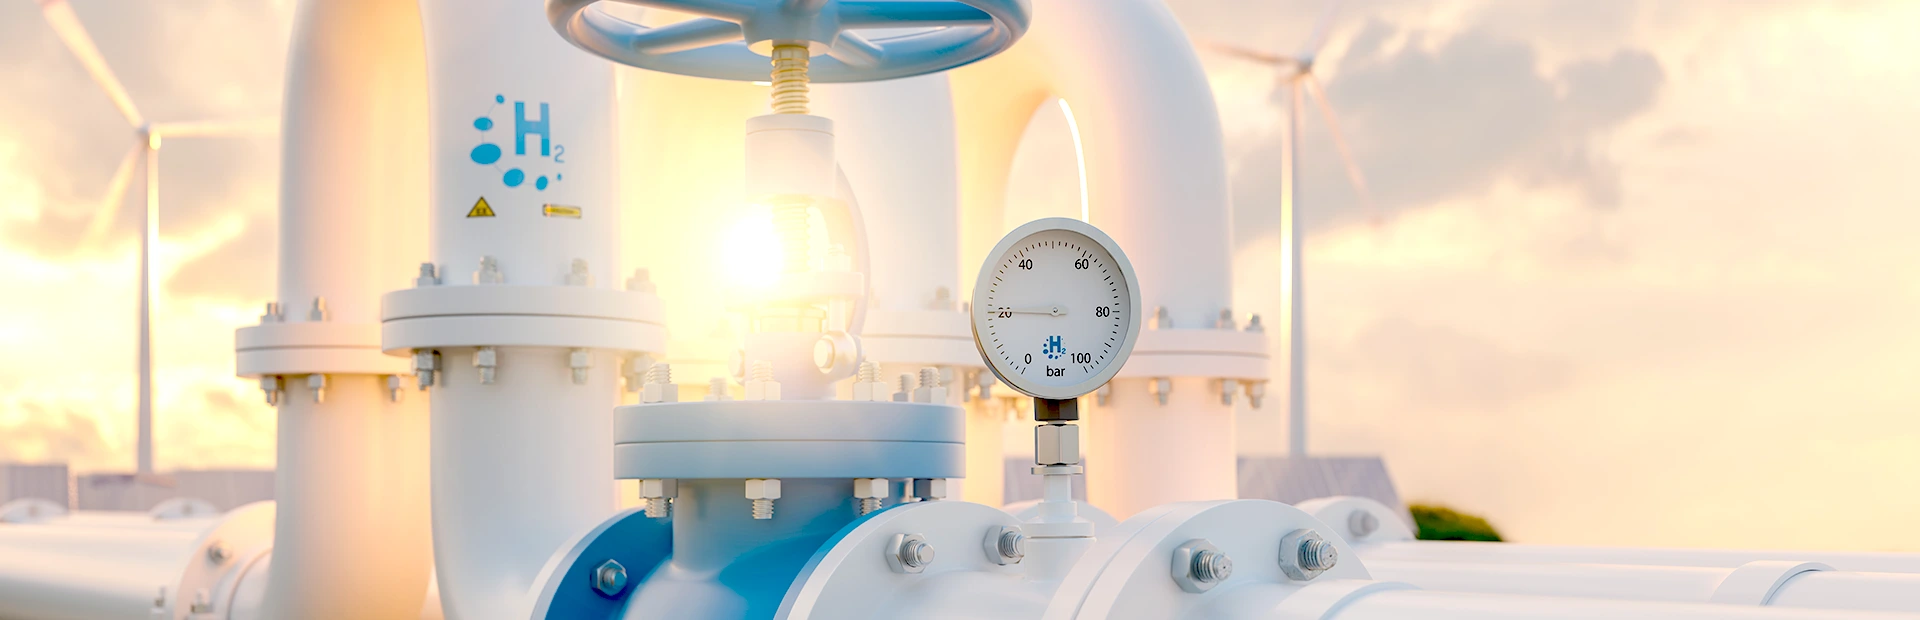 Leading Hydrogen Industry Valve Solutions | KV Controls - Trusted Expertise in South Africa